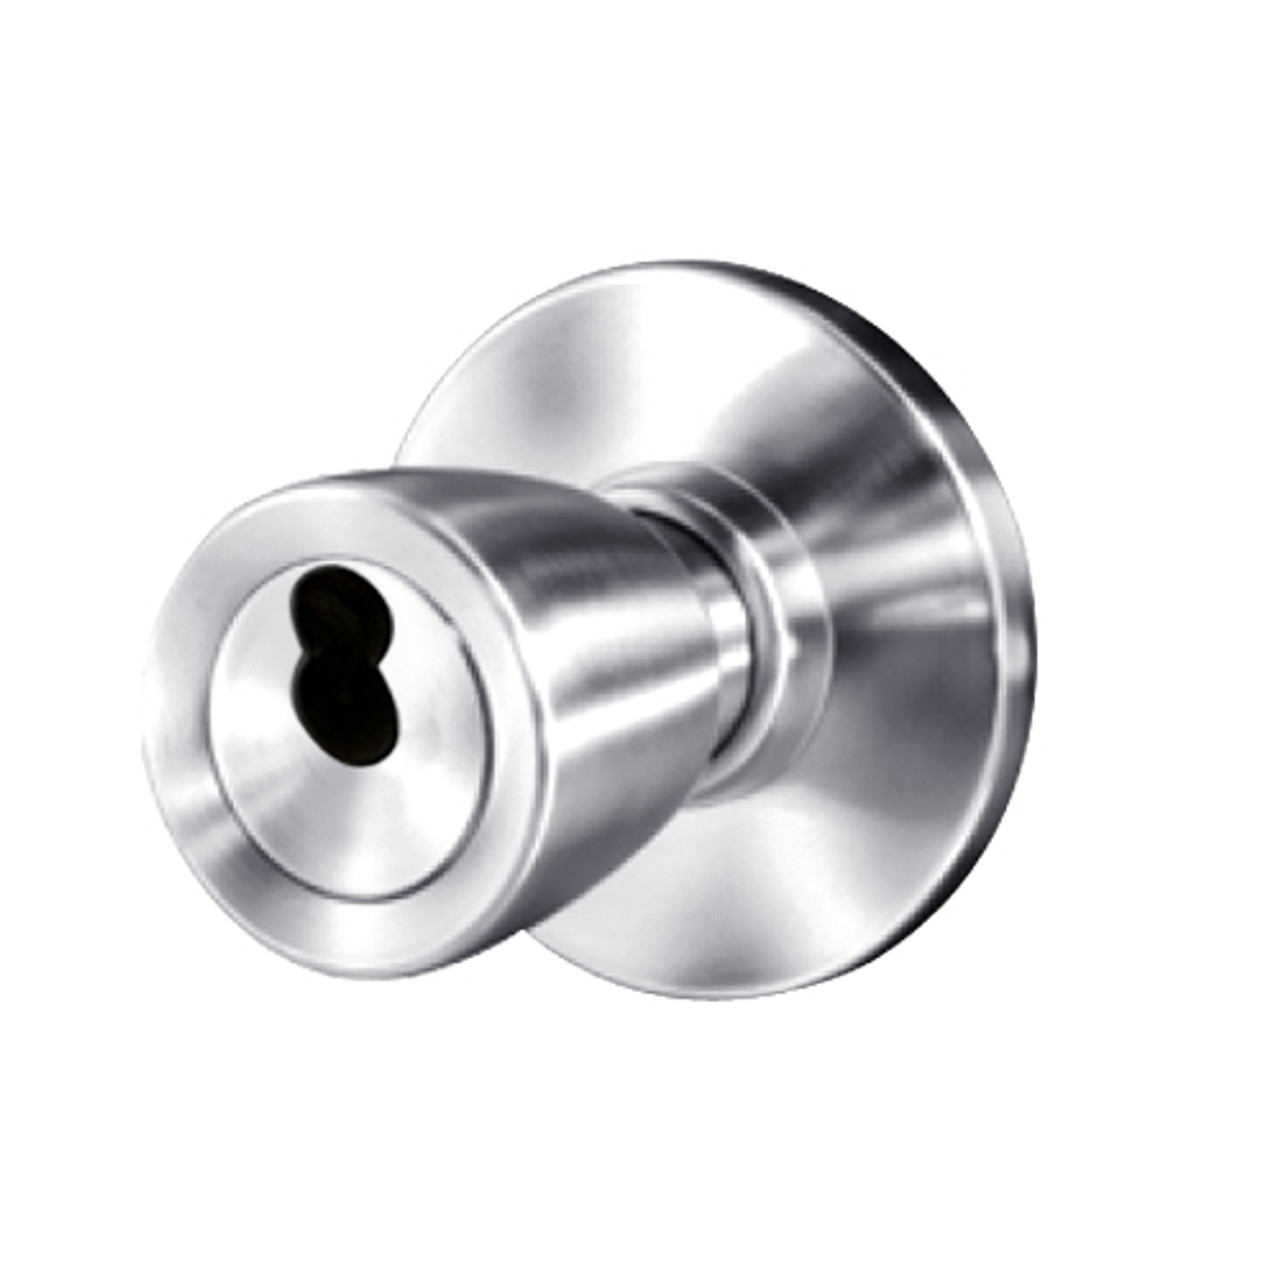 8K57W6AS3625 Best 8K Series Institutional Heavy Duty Cylindrical Knob Locks with Tulip Style in Bright Chrome